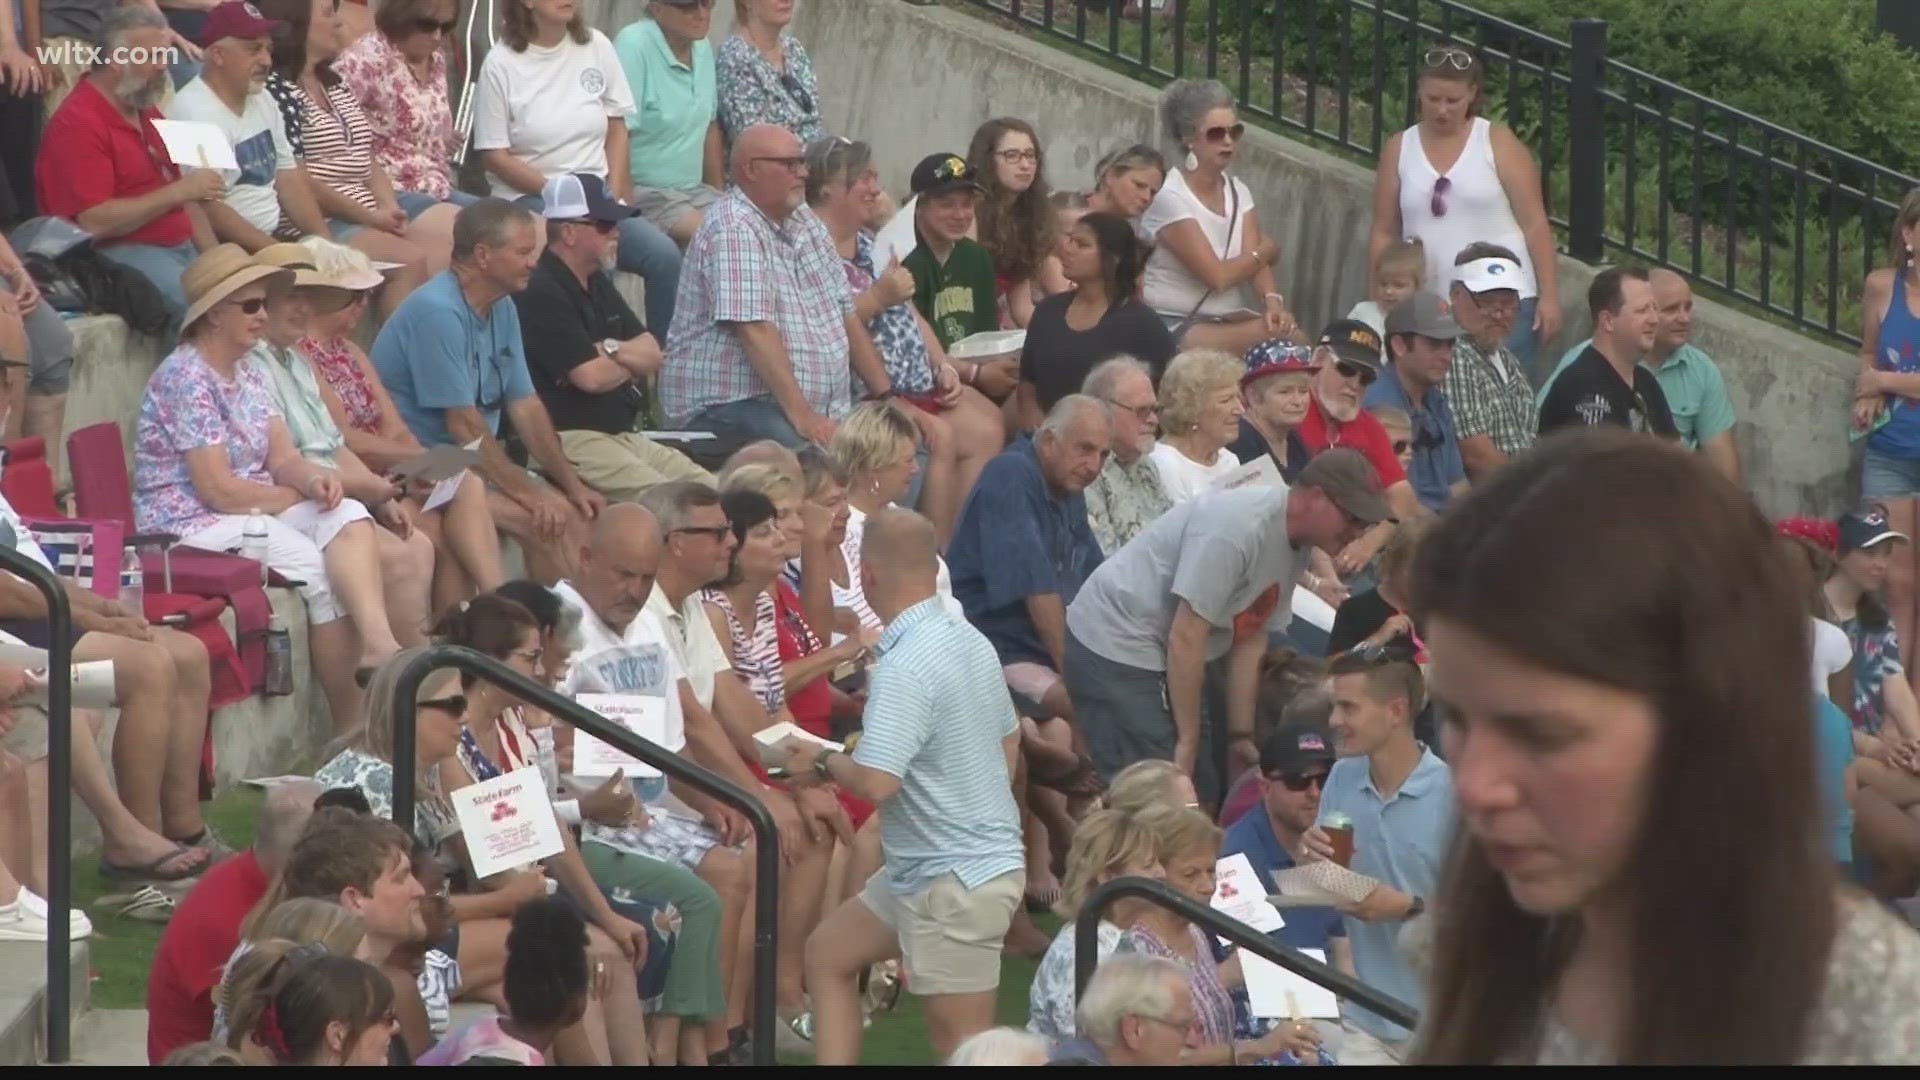 Hundreds gathered in the Town of Lexington Friday to kick off the holiday weekend with it's annual Fourth of July celebration.